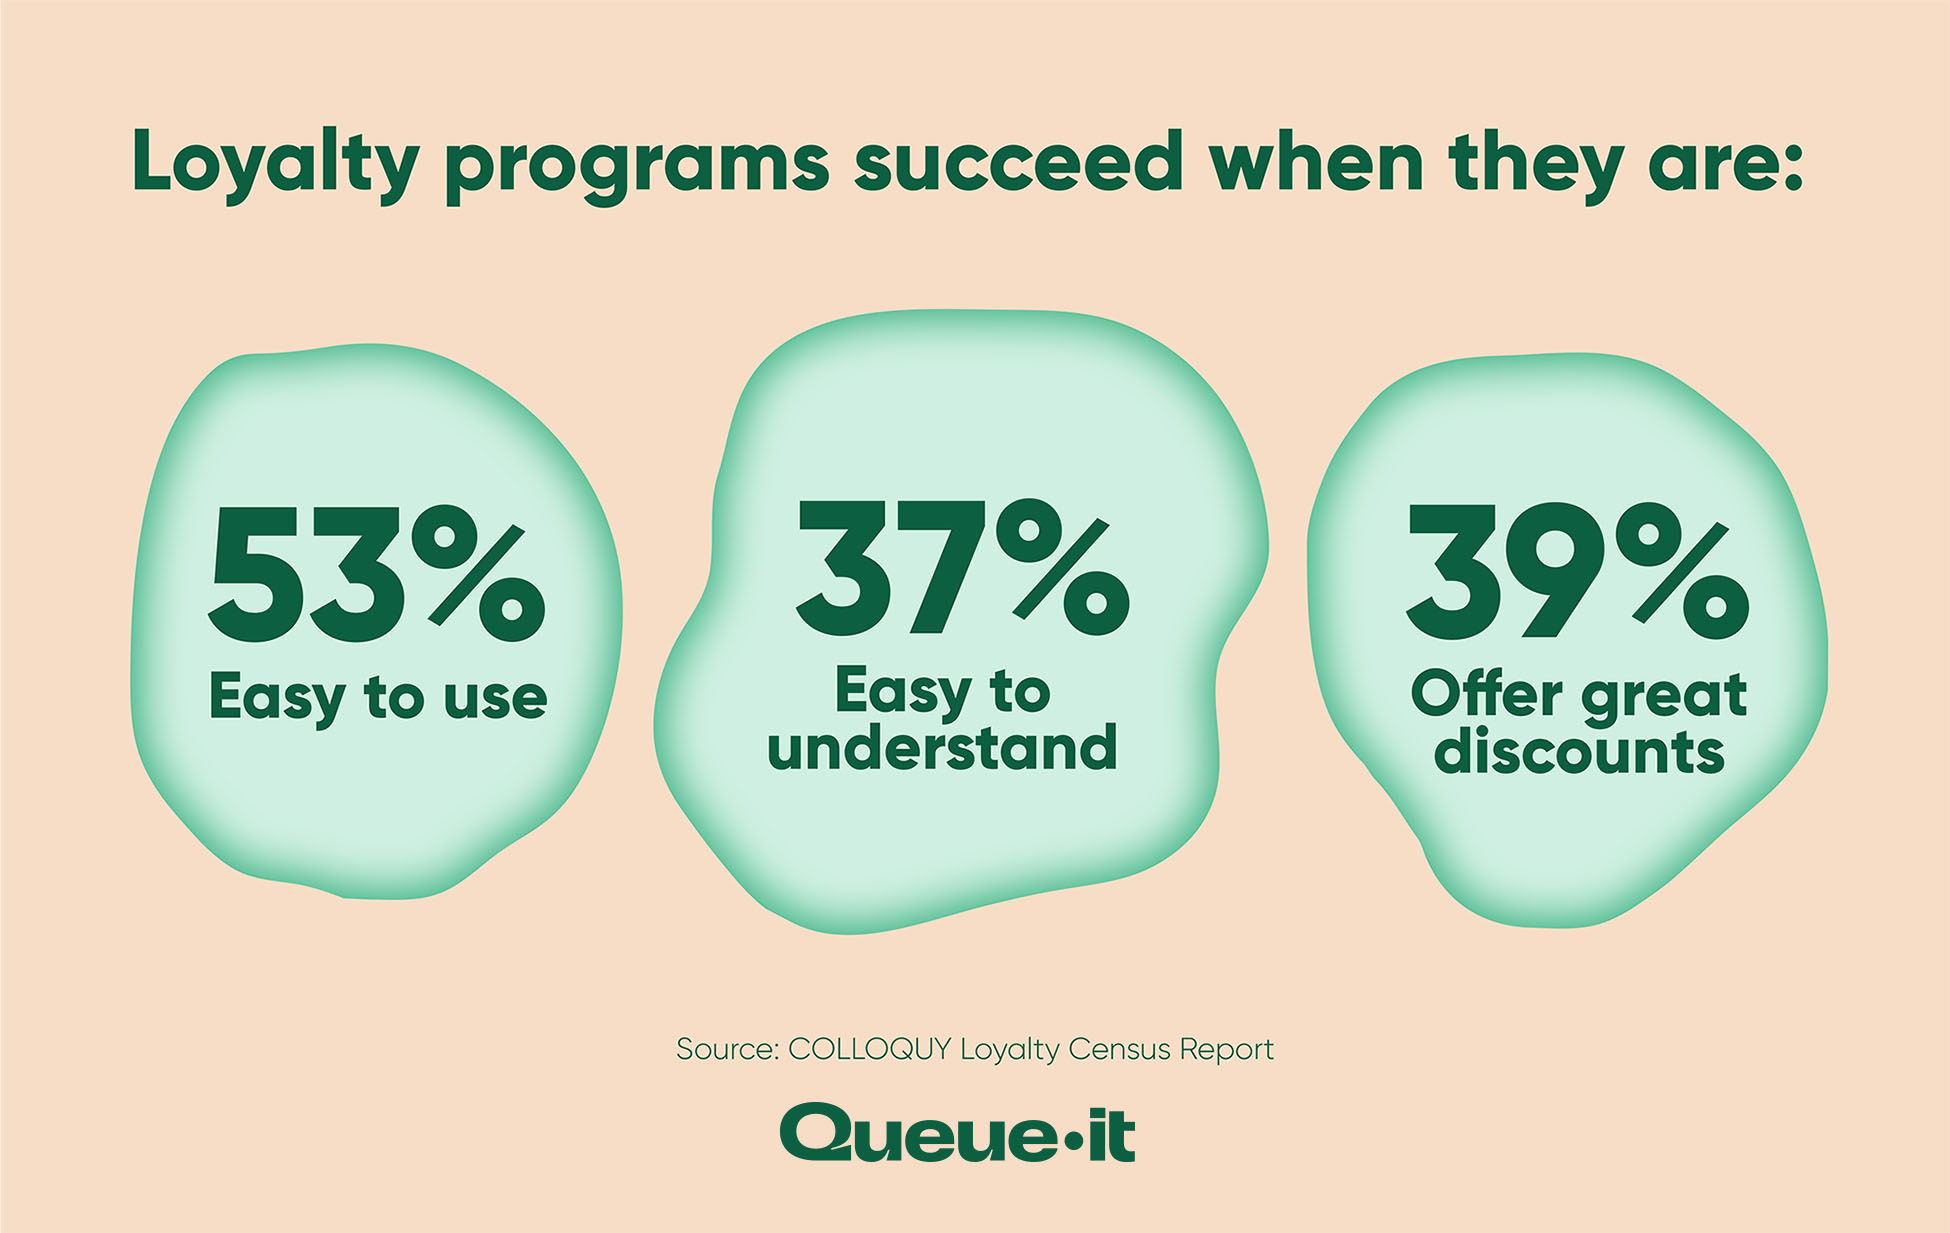 Loyalty programs succeed when they are: Easy to use, offer great discounts, and easy to understand